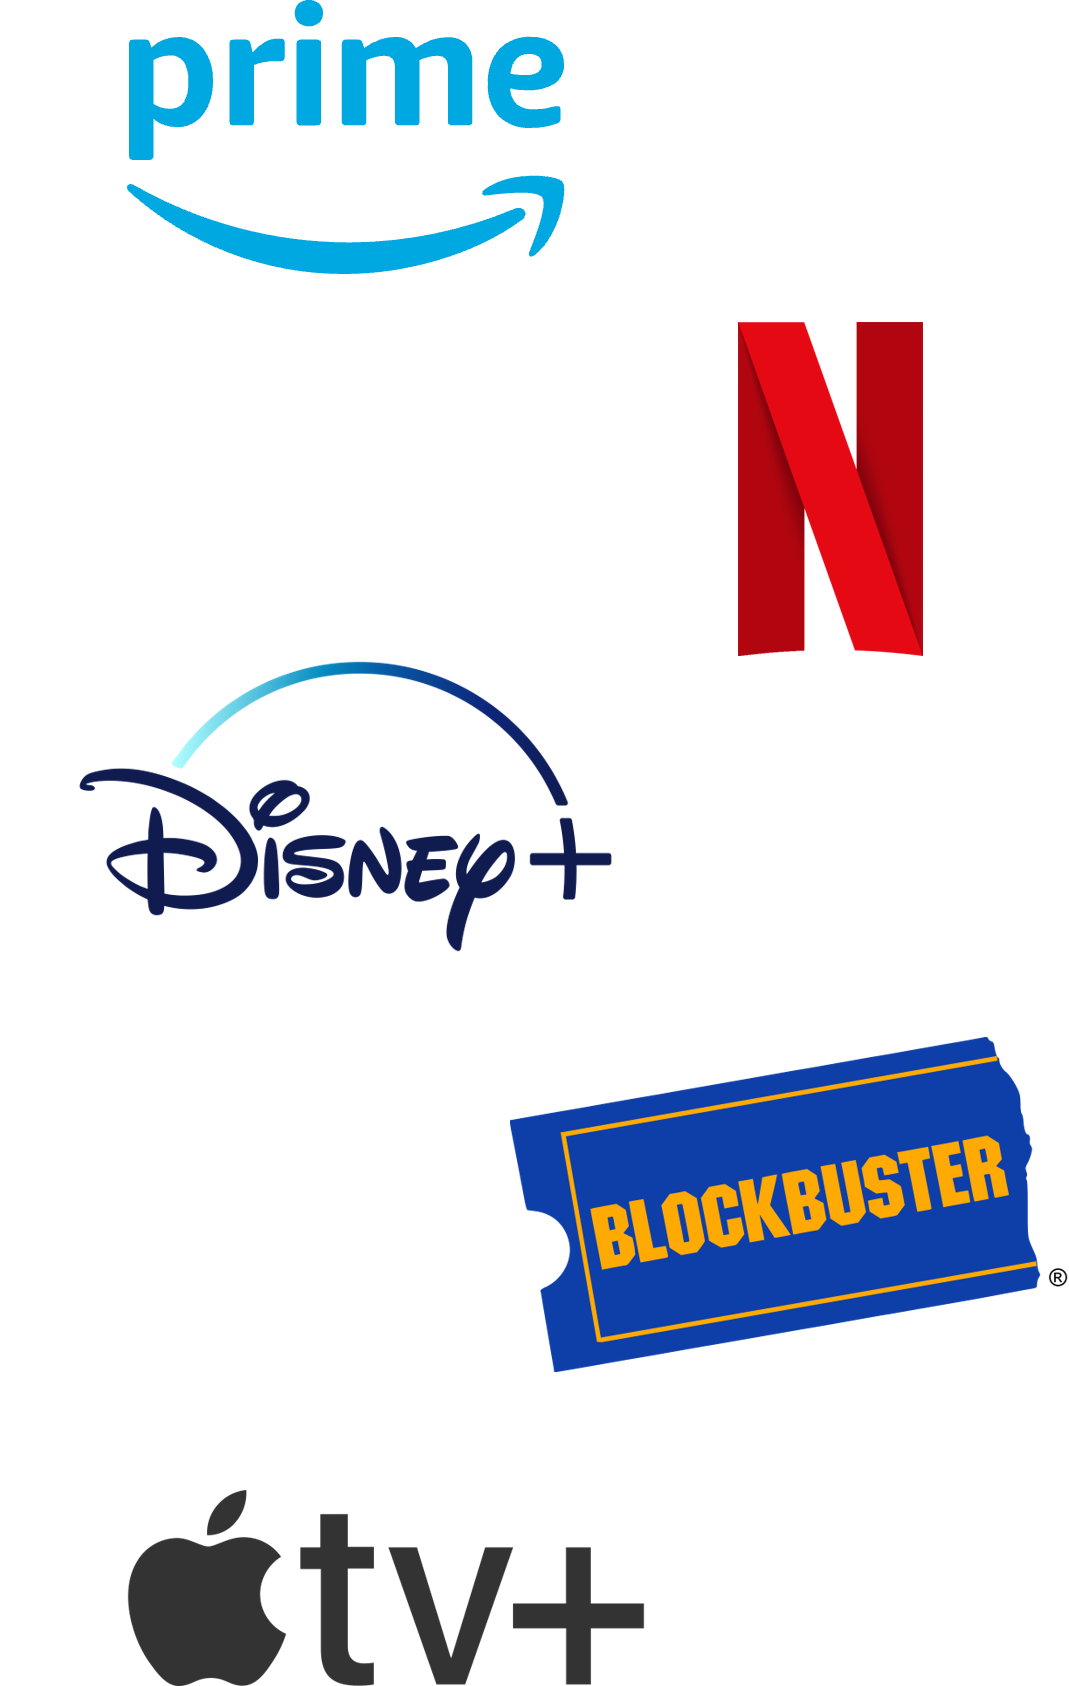 The image contains logos of companies related to data monetization as described in the text above. The companies are Amazon Prime, Netflix, Disney Plus, Blockbuster, and Apple TV.